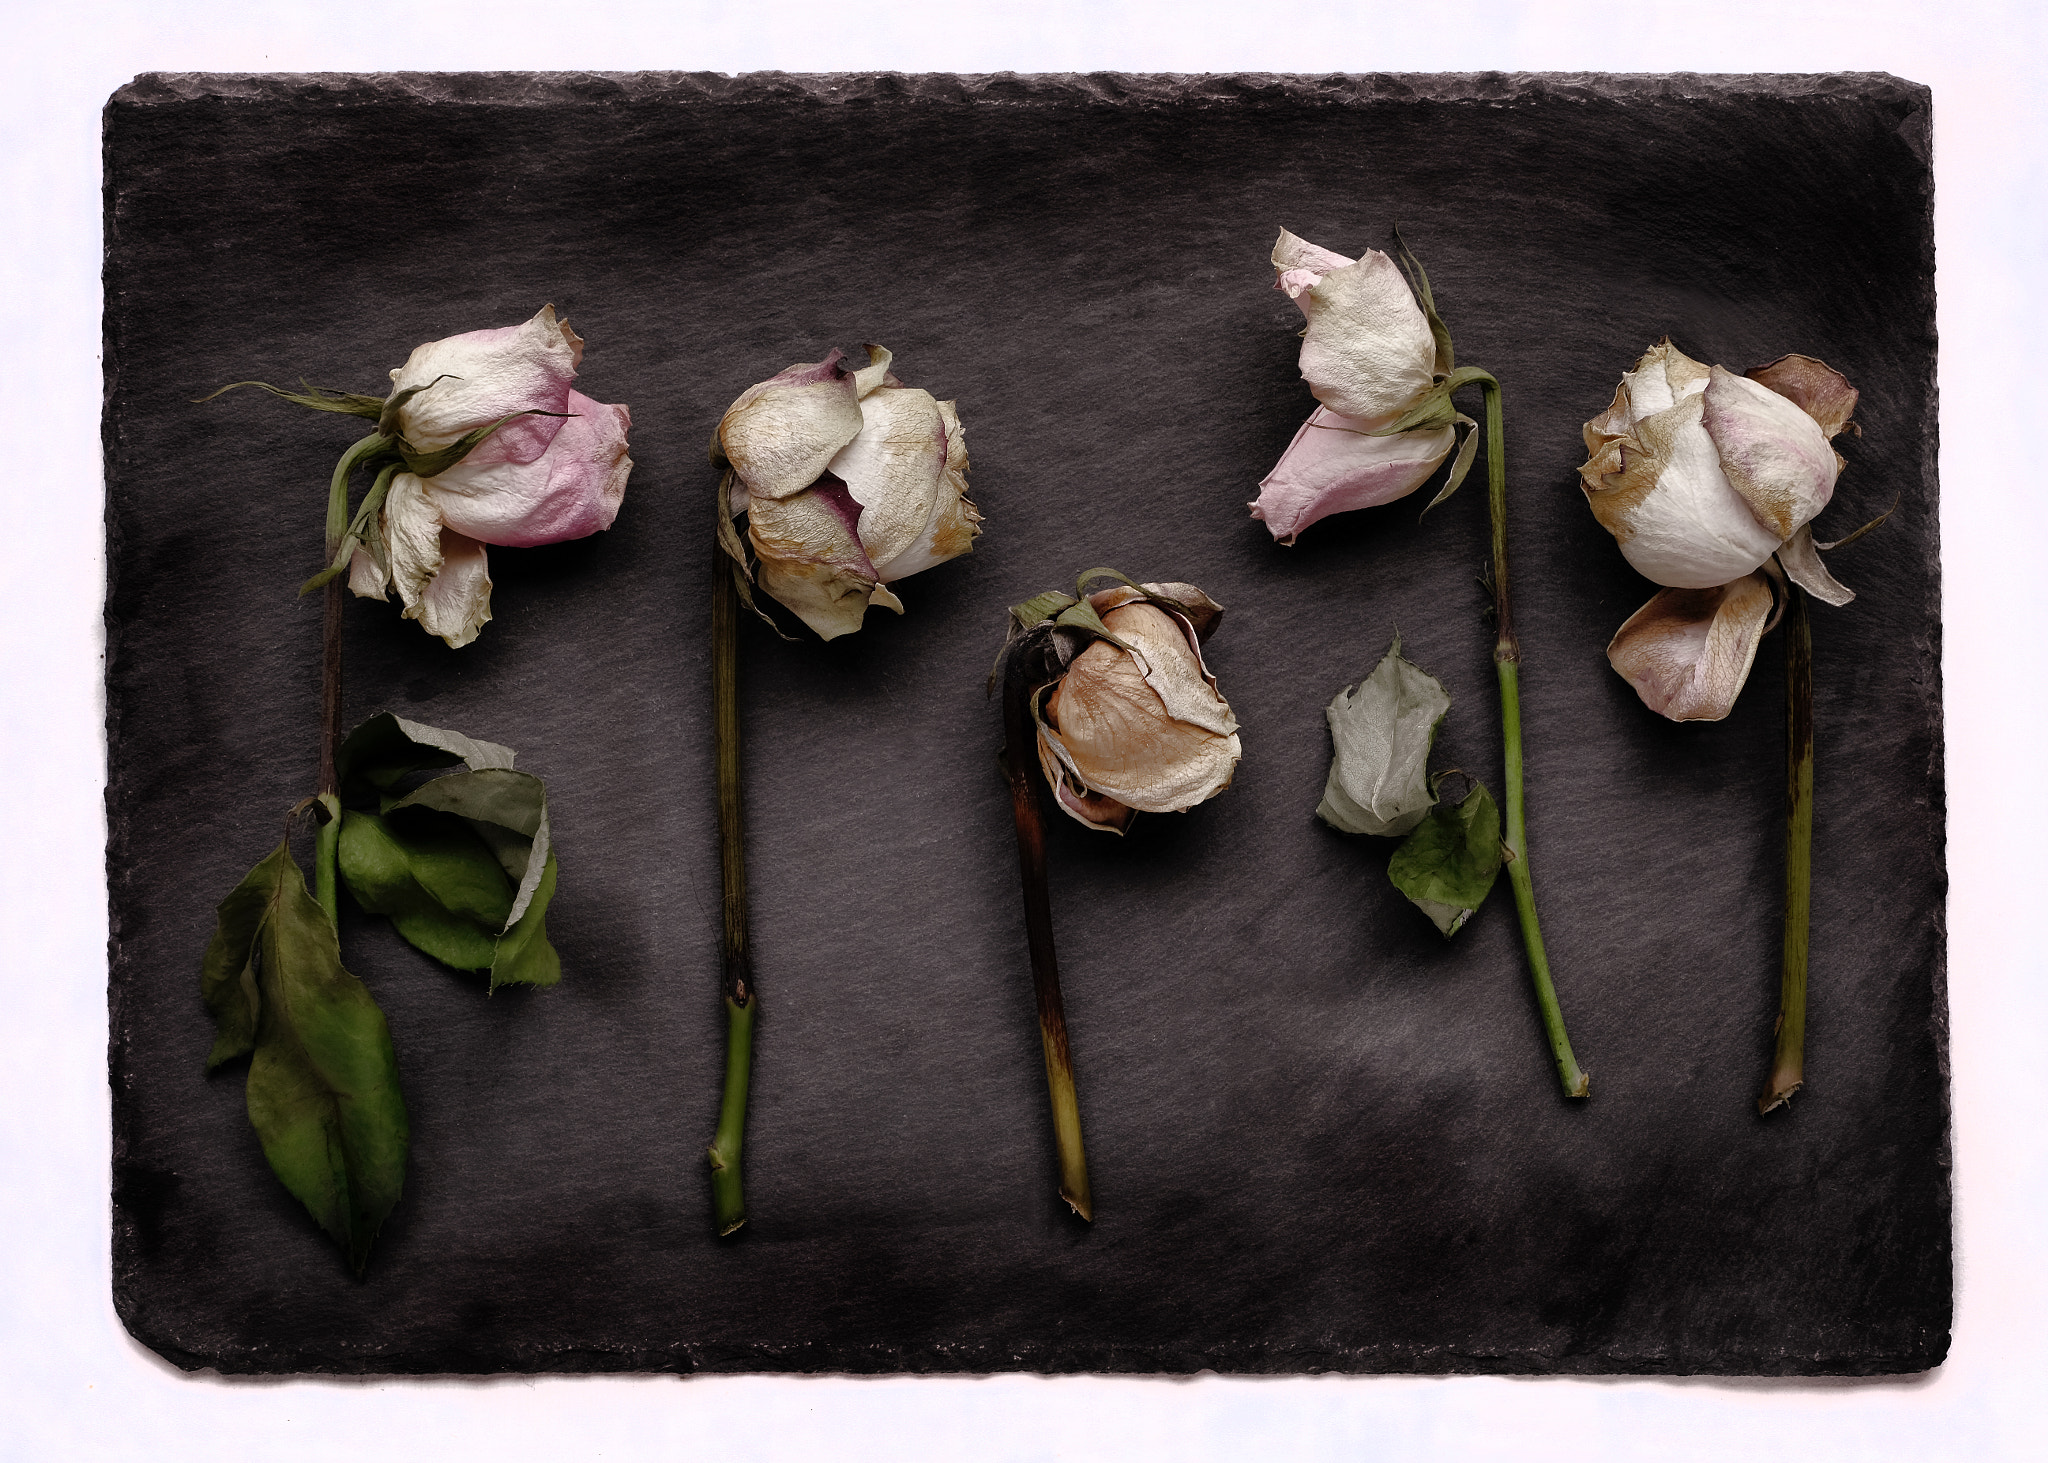 Fujifilm X-T2 + ZEISS Touit 50mm F2.8 sample photo. Five decaying roses photography